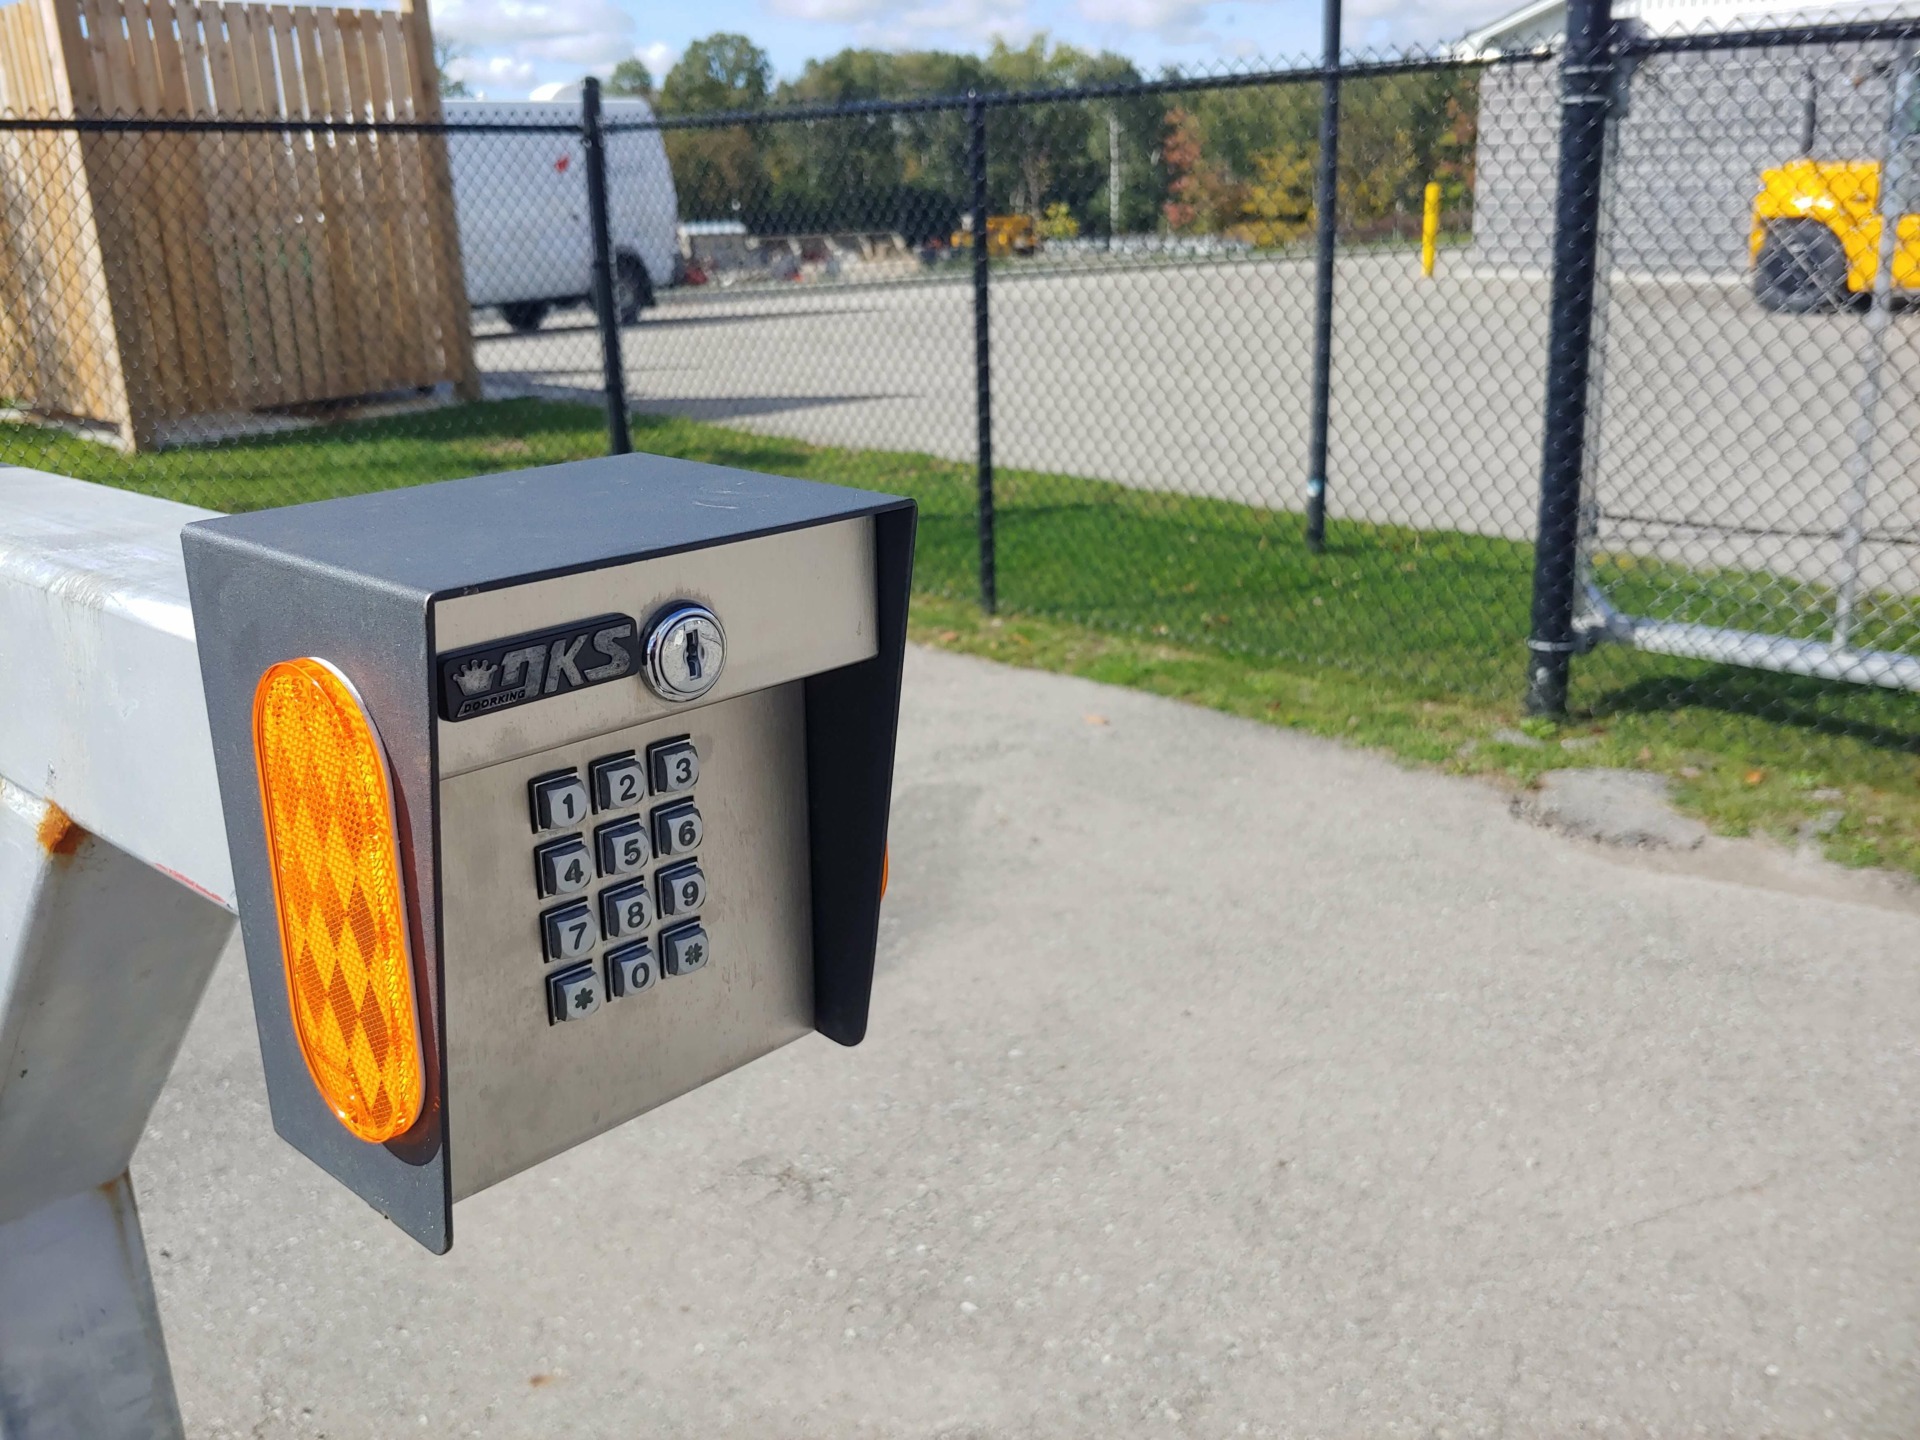 A 24/7 Accessible security gate and keypad.